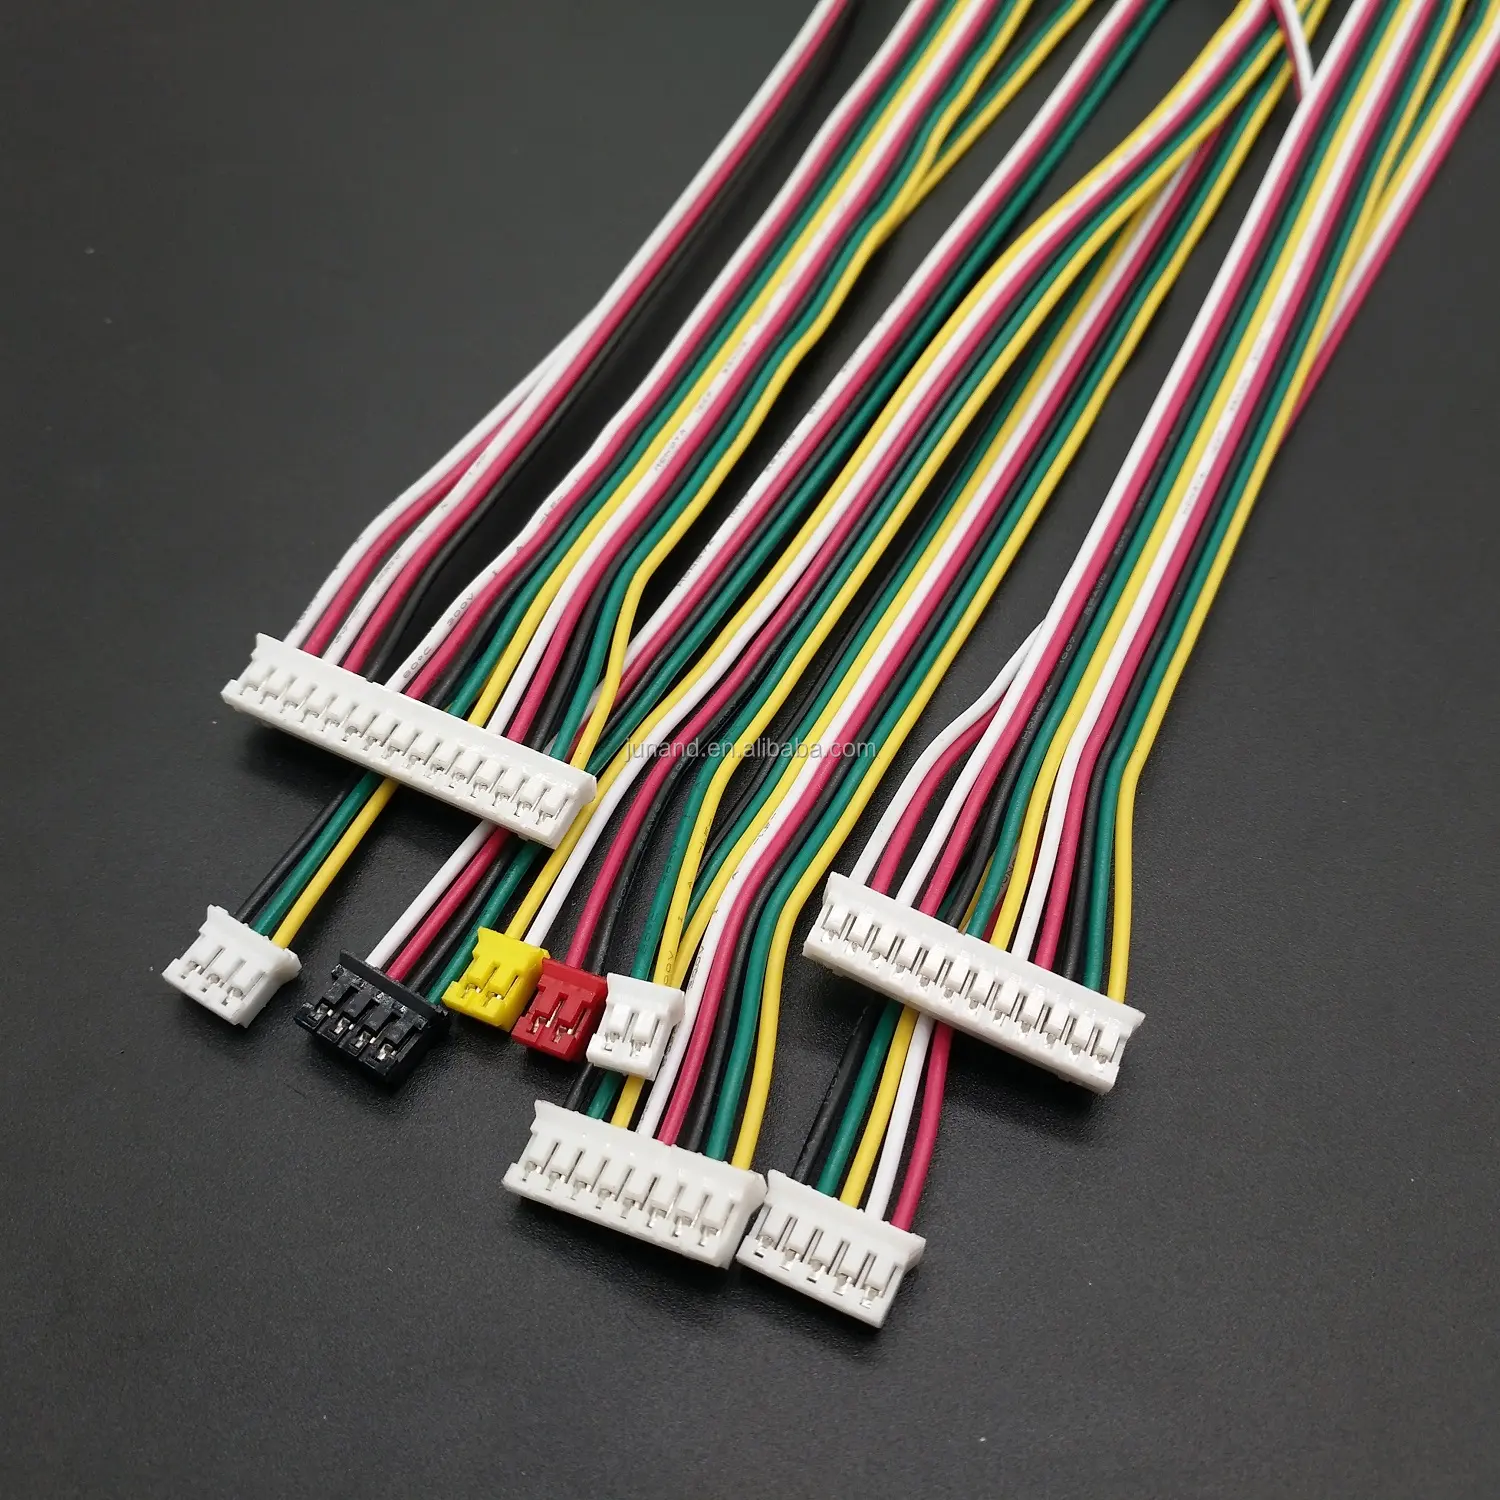 Custom OEM JST 2 3 4 5 6 7 8 9 10 pin male female connector electrical wires 1.5mm pitch wire cable assembly wiring harness